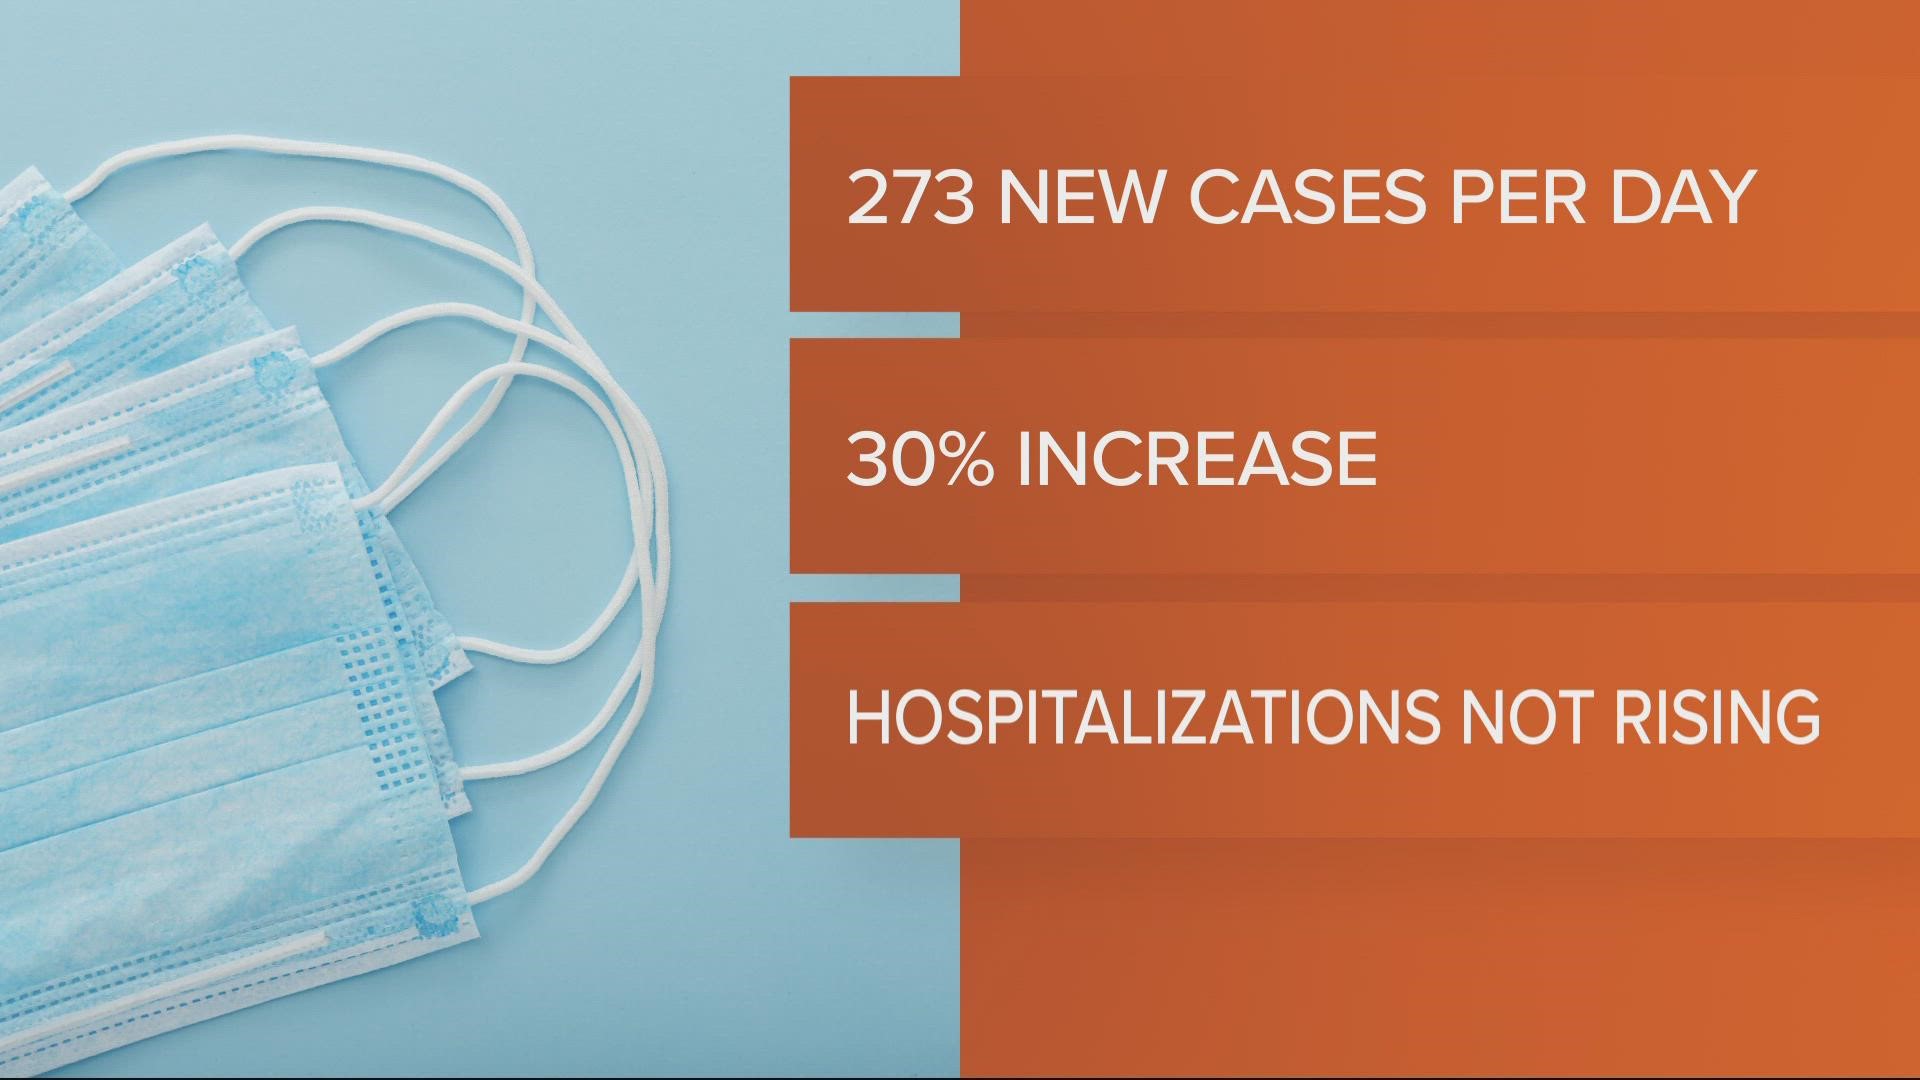 As of Friday, the county is averaging 273 new cases a day. That's a 30% increase from last week, but hospitalizations aren't rising.